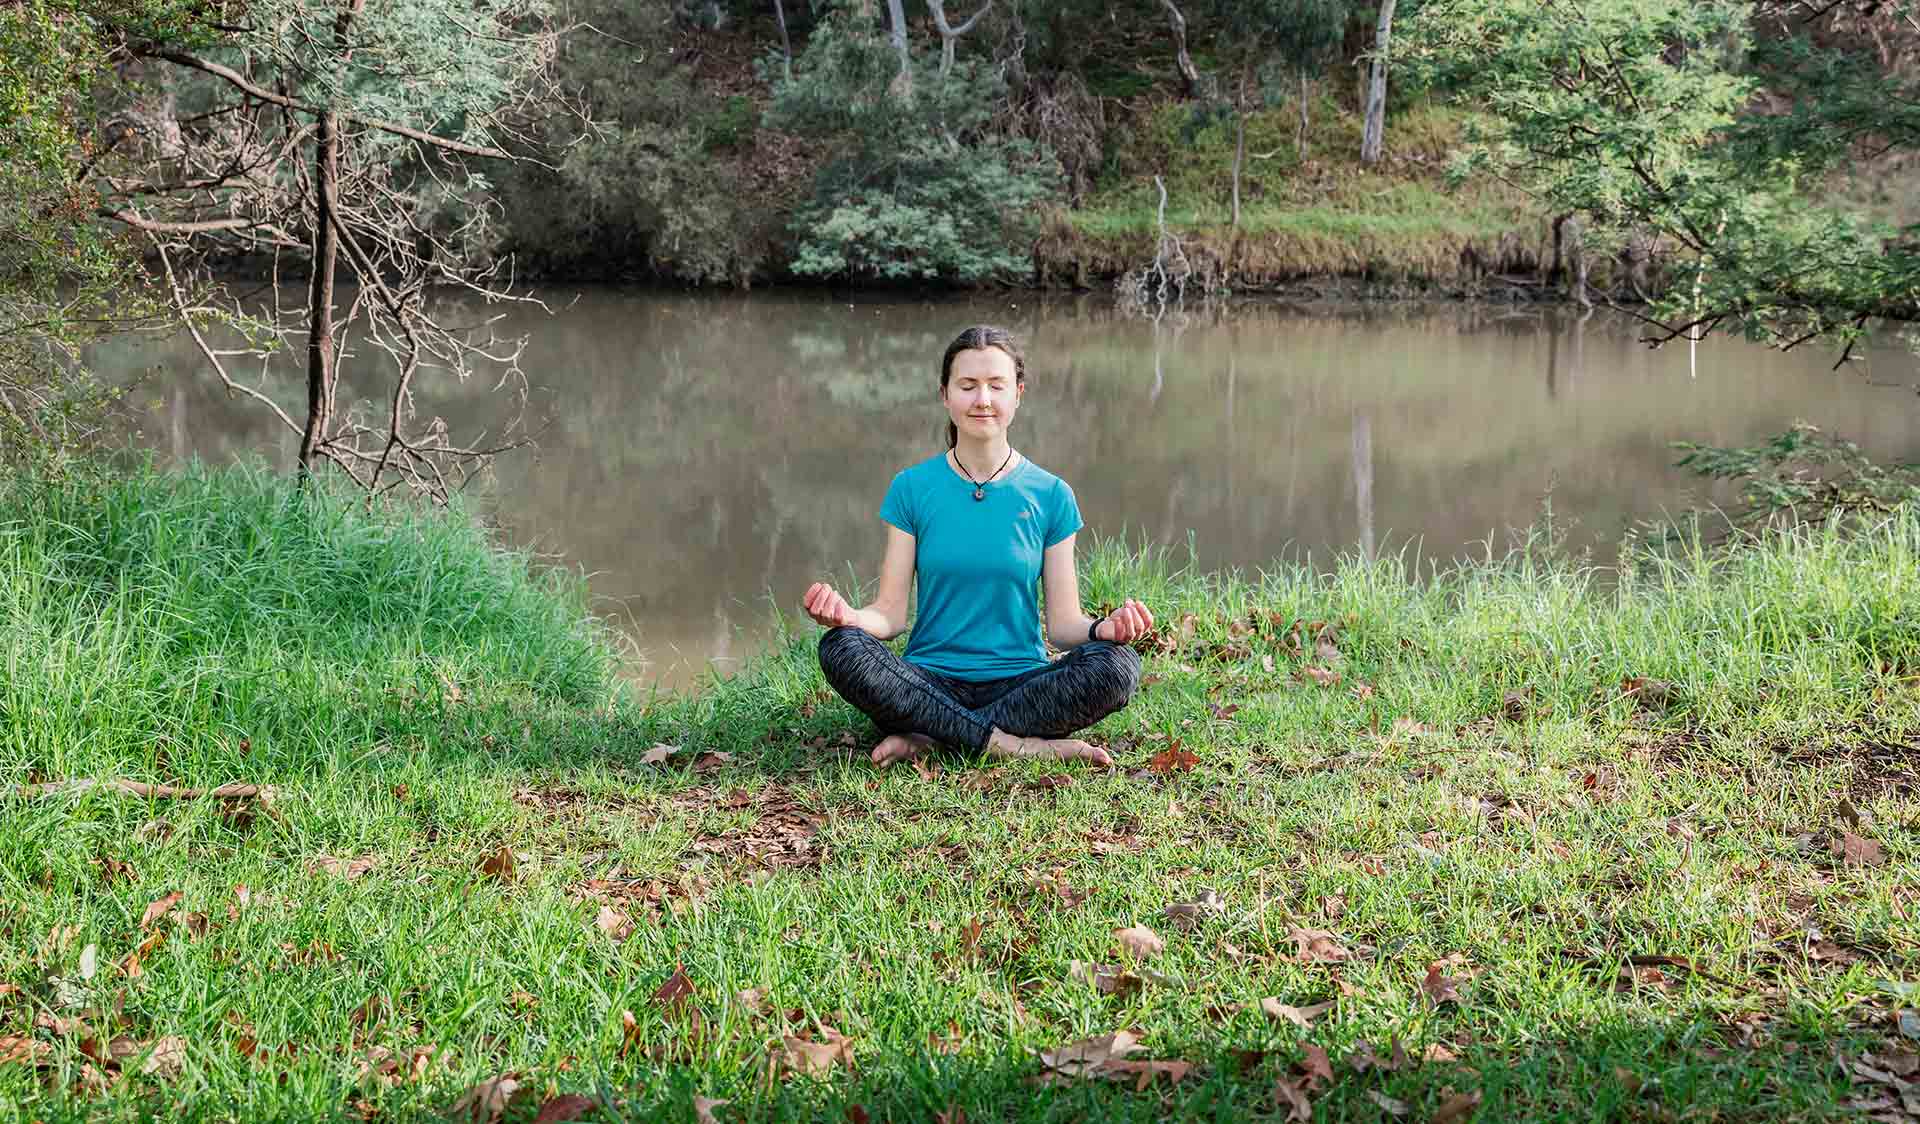 A women practices Yoga on the banks of the Yarra River at Yarra Bend Park.